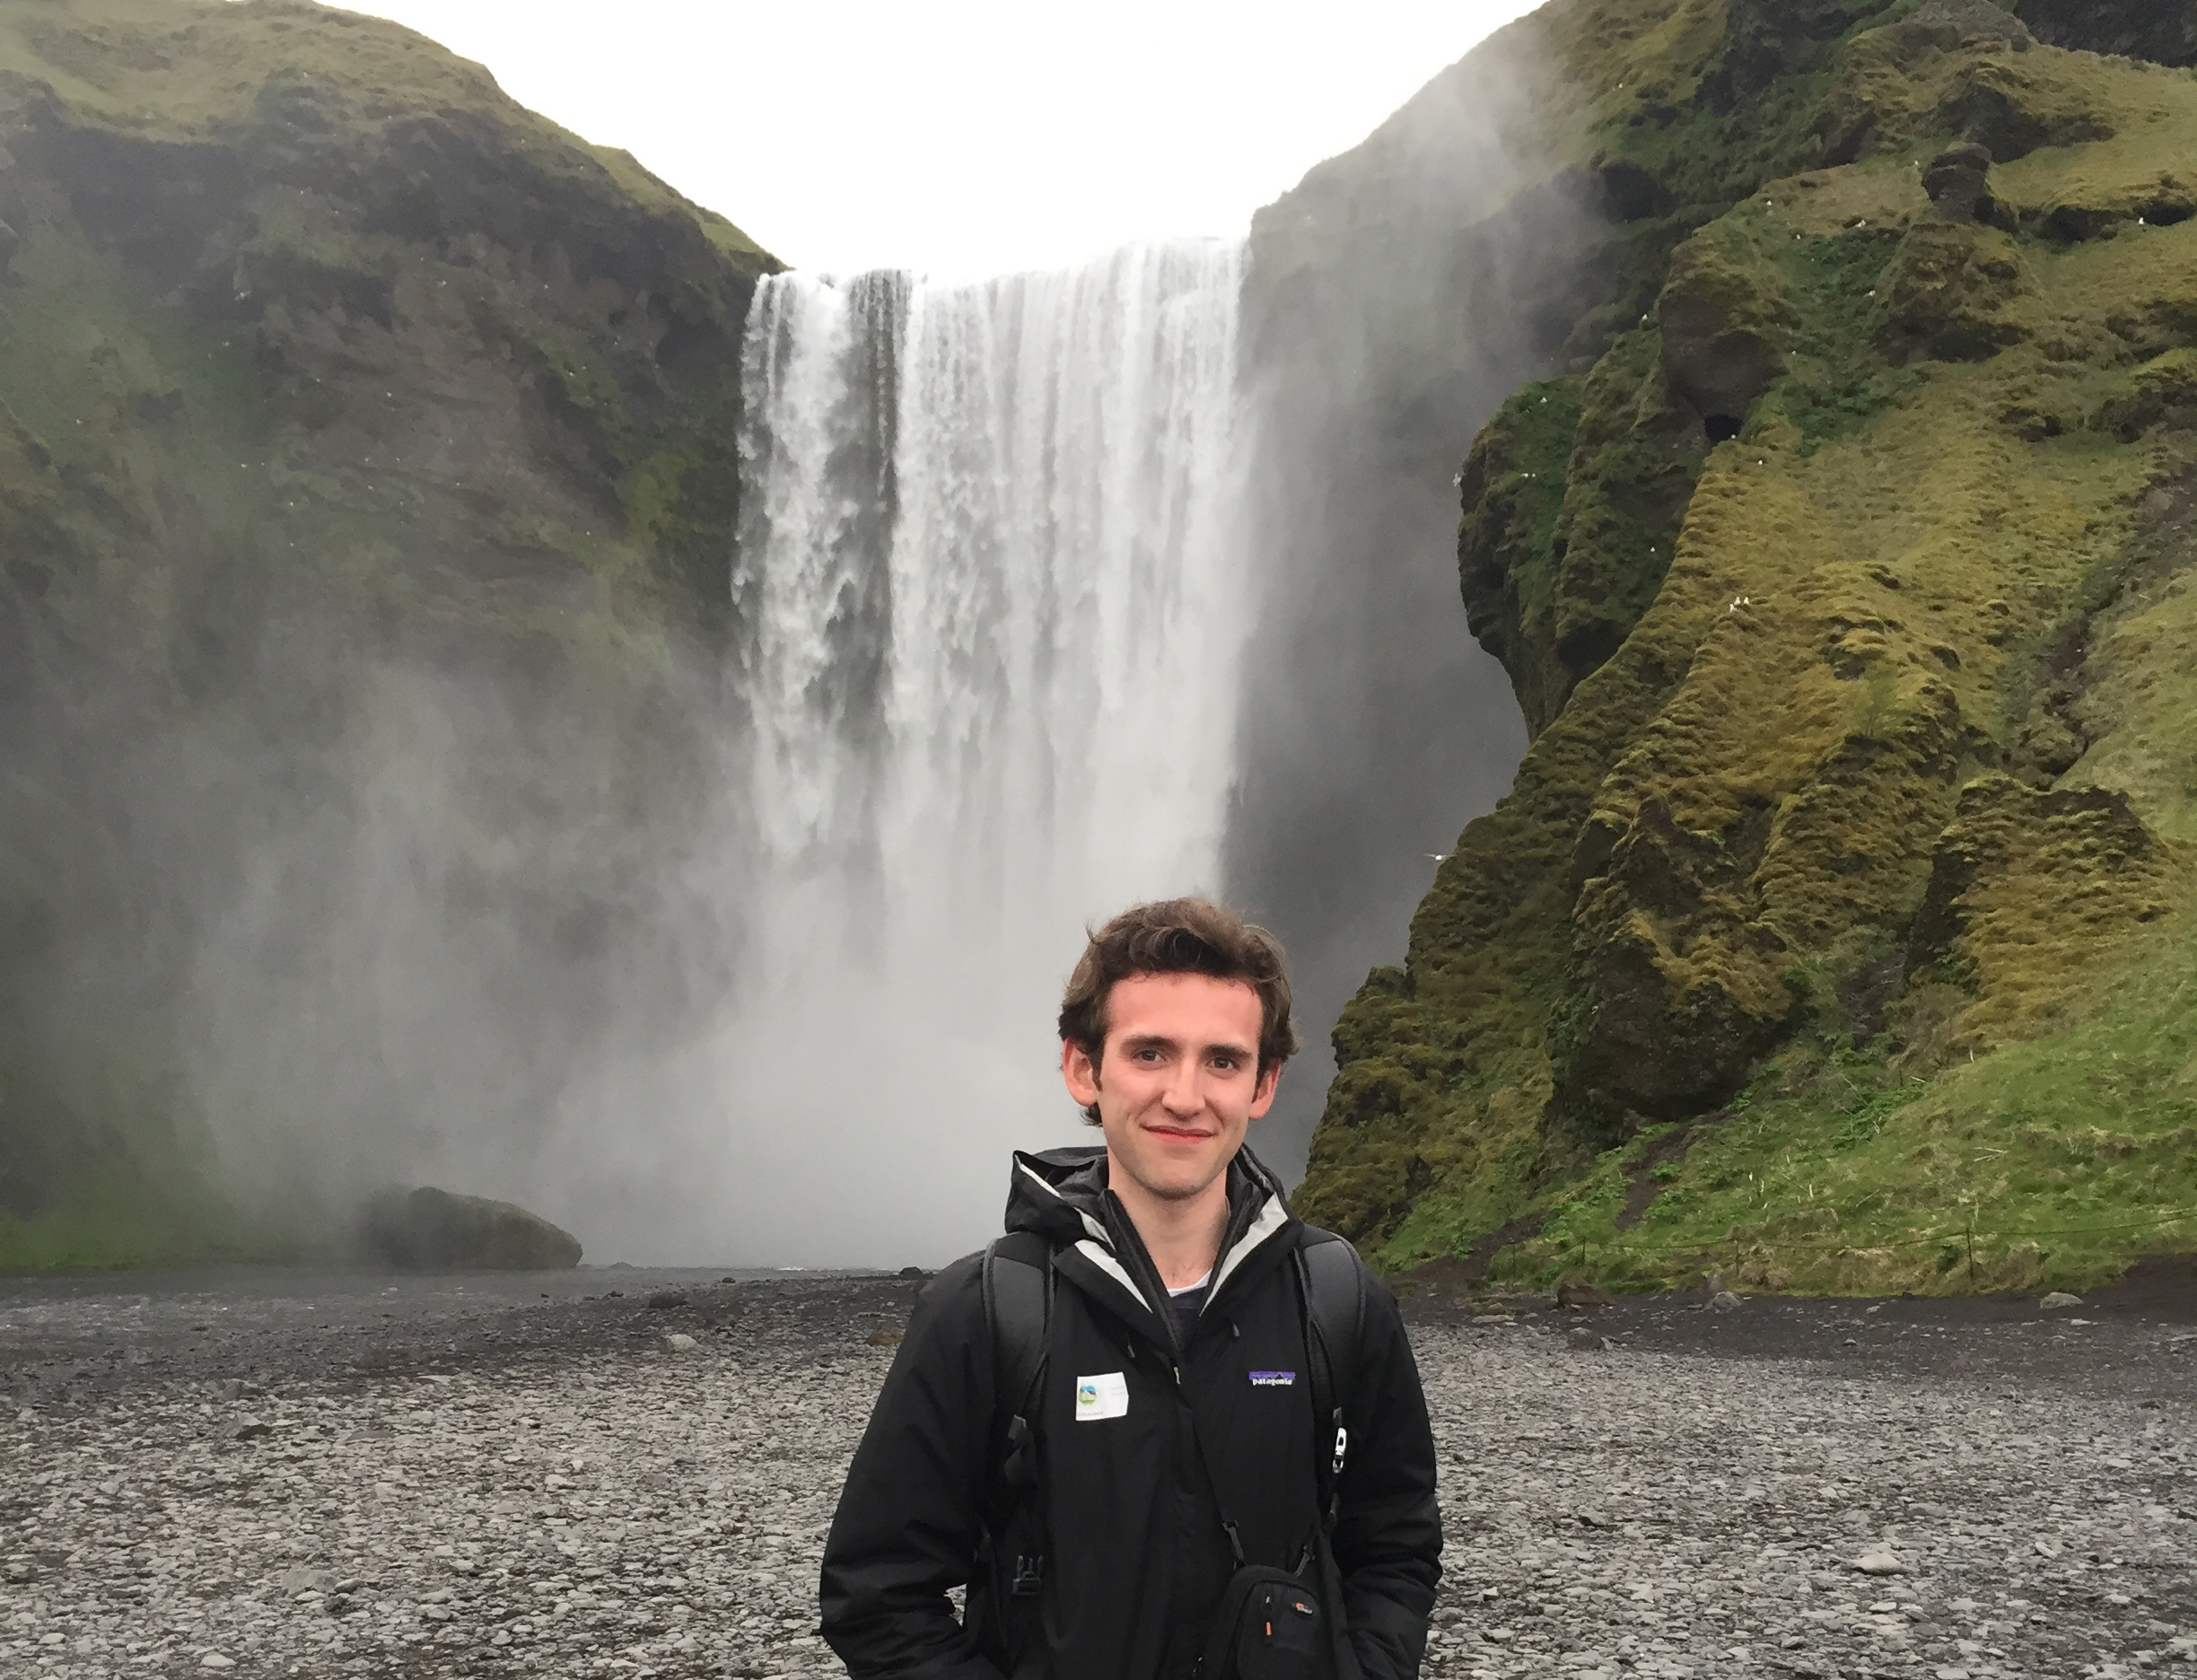  Joseph standing in front of Skógafoss Waterfall in Iceland